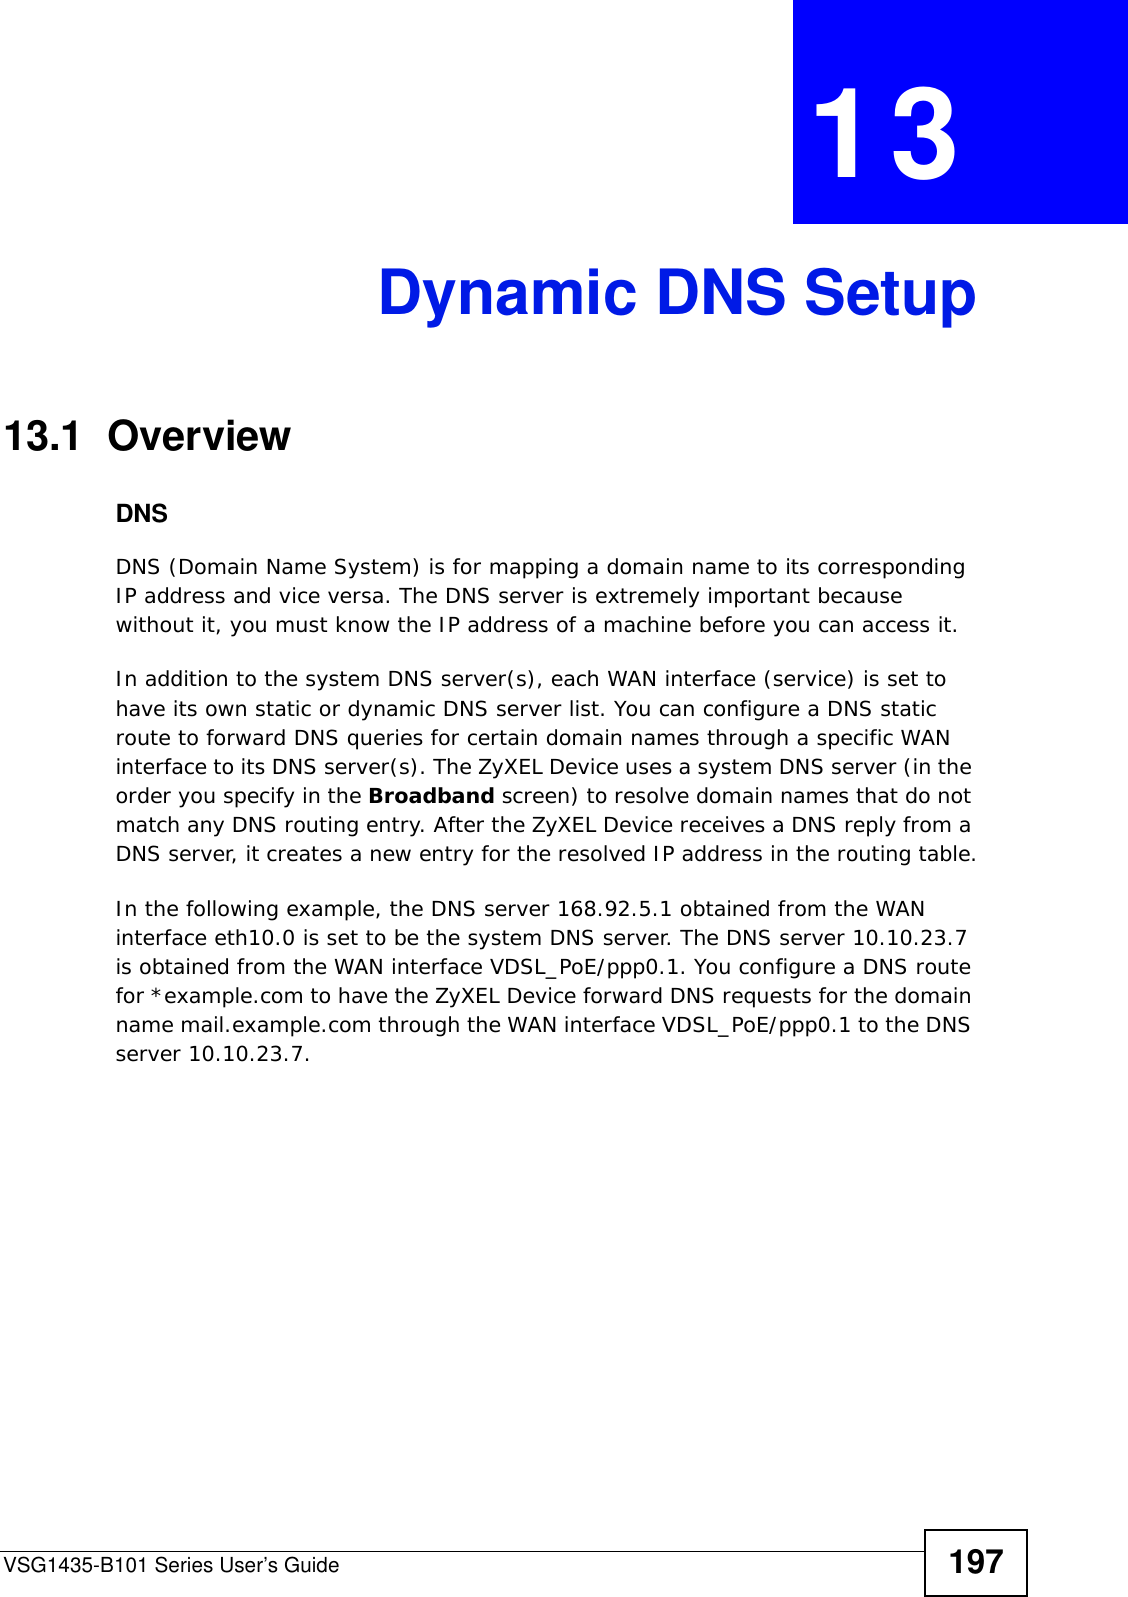 VSG1435-B101 Series User’s Guide 197CHAPTER  13 Dynamic DNS Setup13.1  Overview DNSDNS (Domain Name System) is for mapping a domain name to its corresponding IP address and vice versa. The DNS server is extremely important because without it, you must know the IP address of a machine before you can access it. In addition to the system DNS server(s), each WAN interface (service) is set to have its own static or dynamic DNS server list. You can configure a DNS static route to forward DNS queries for certain domain names through a specific WAN interface to its DNS server(s). The ZyXEL Device uses a system DNS server (in the order you specify in the Broadband screen) to resolve domain names that do not match any DNS routing entry. After the ZyXEL Device receives a DNS reply from a DNS server, it creates a new entry for the resolved IP address in the routing table.In the following example, the DNS server 168.92.5.1 obtained from the WAN interface eth10.0 is set to be the system DNS server. The DNS server 10.10.23.7 is obtained from the WAN interface VDSL_PoE/ppp0.1. You configure a DNS route for *example.com to have the ZyXEL Device forward DNS requests for the domain name mail.example.com through the WAN interface VDSL_PoE/ppp0.1 to the DNS server 10.10.23.7.